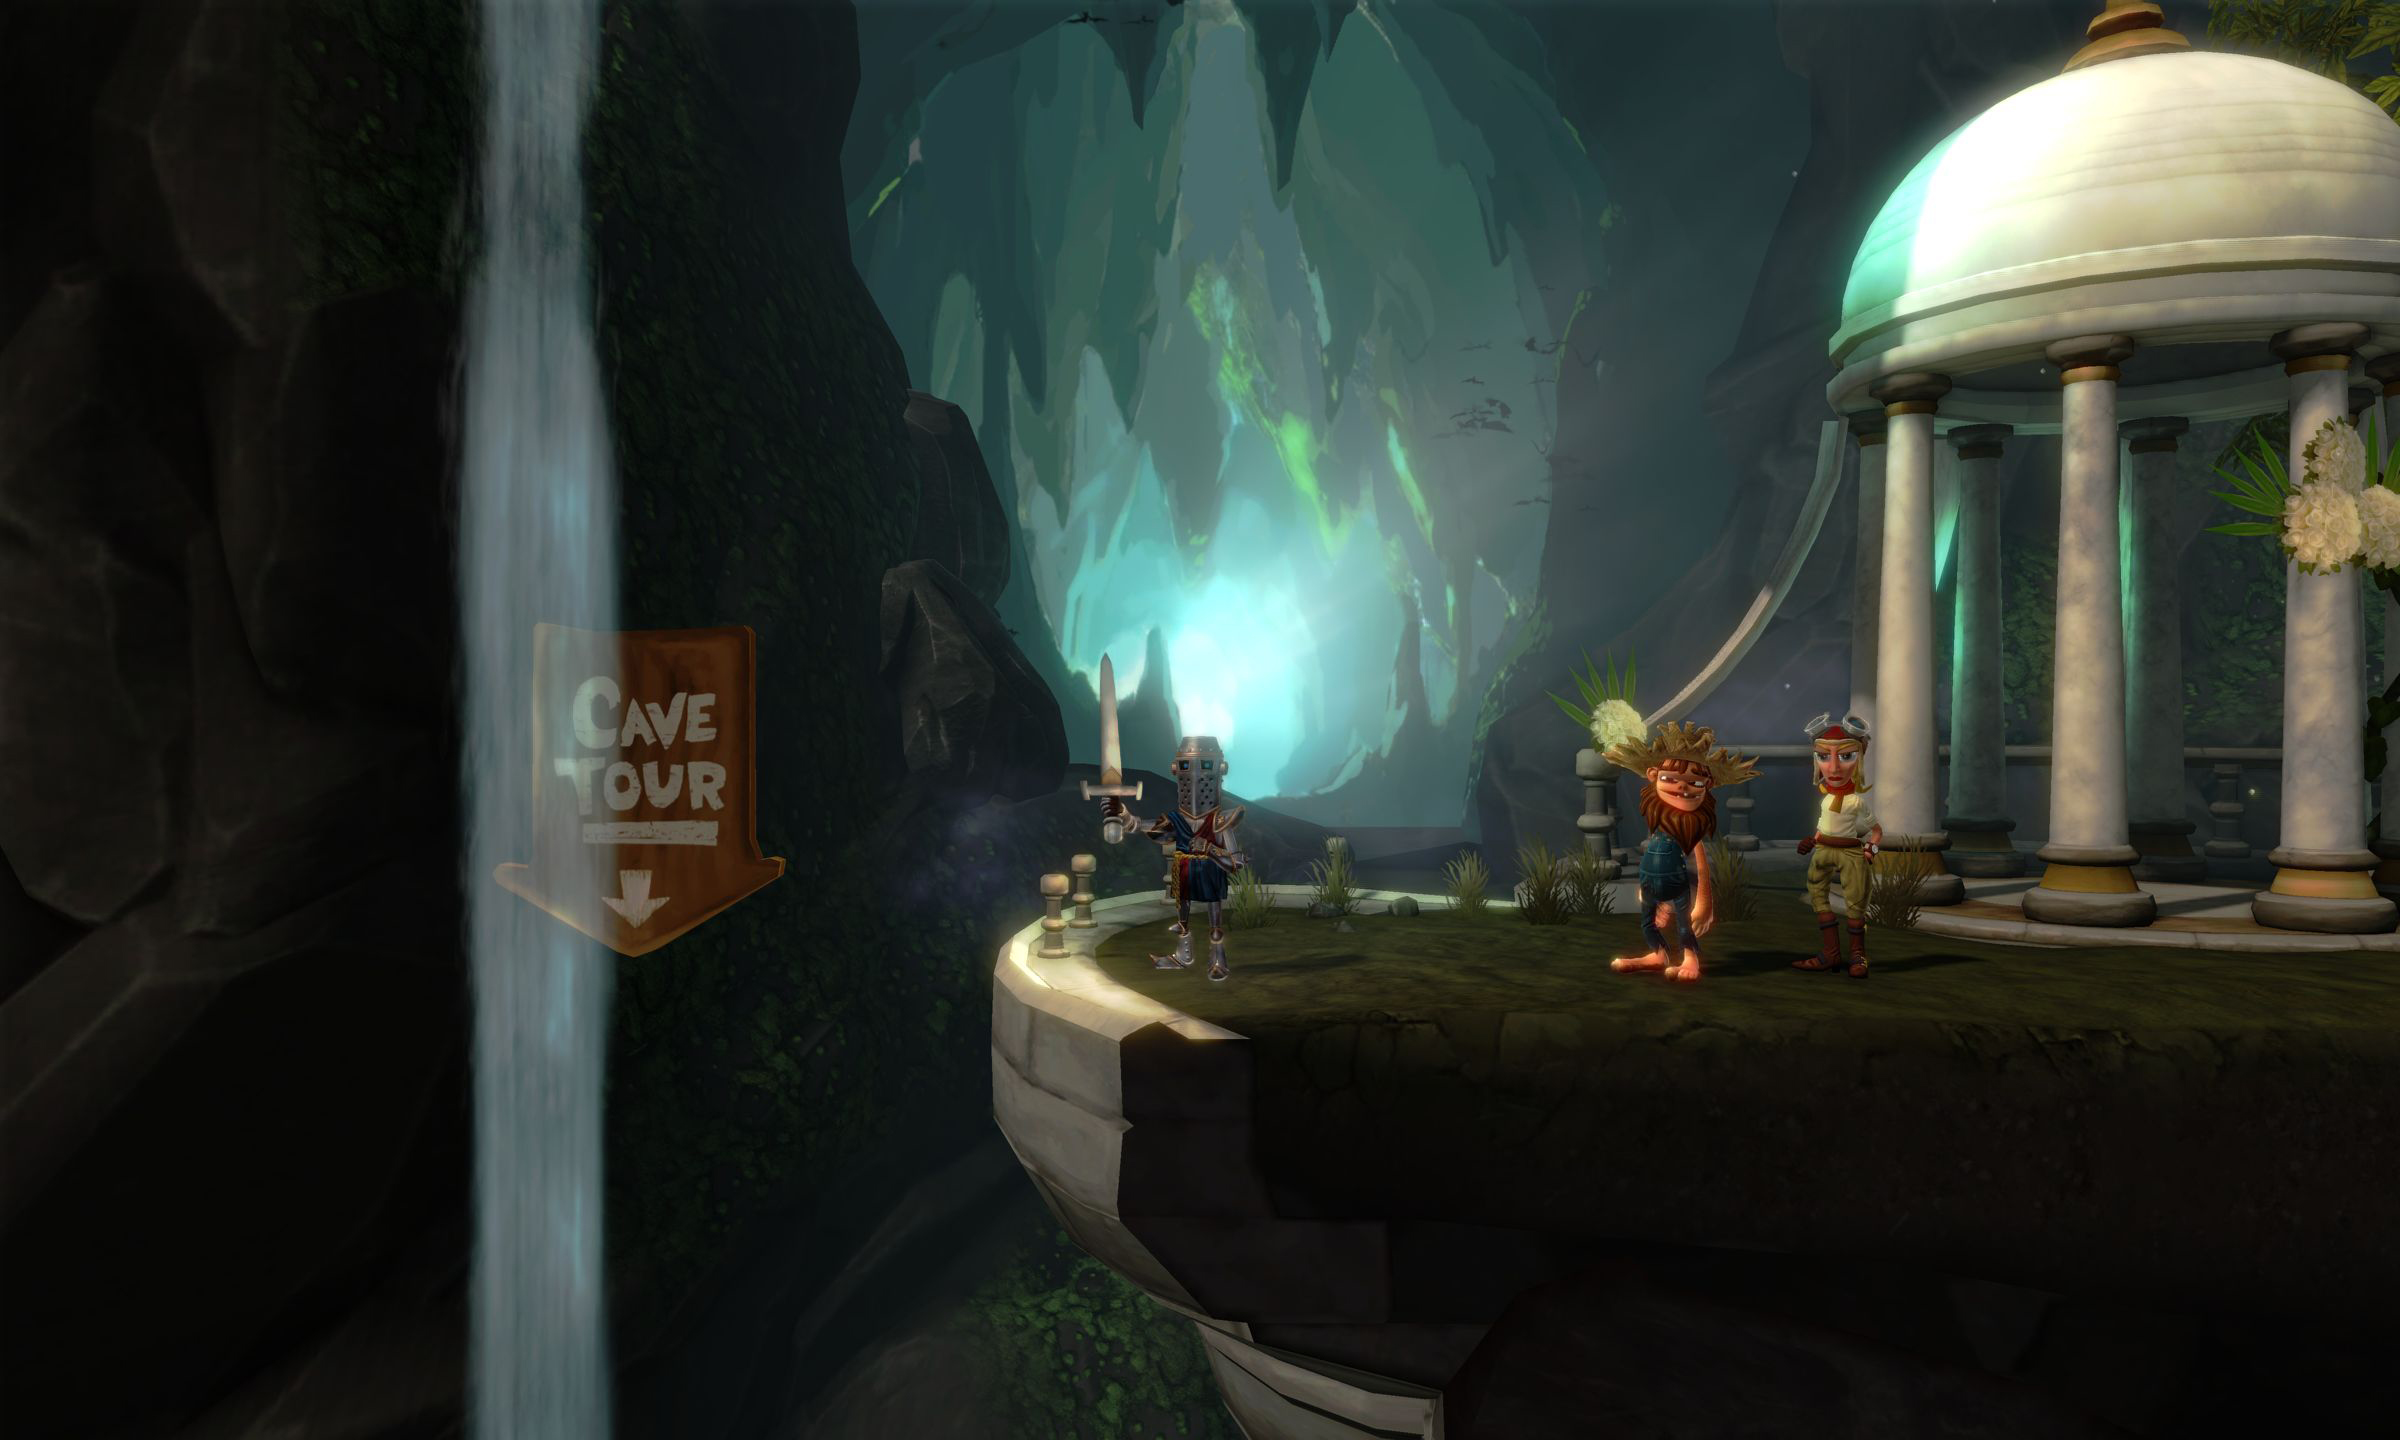 Caves adventures. The Cave игра. The Cave Xbox 360. The Cave пс3. Игра the Cave 2.